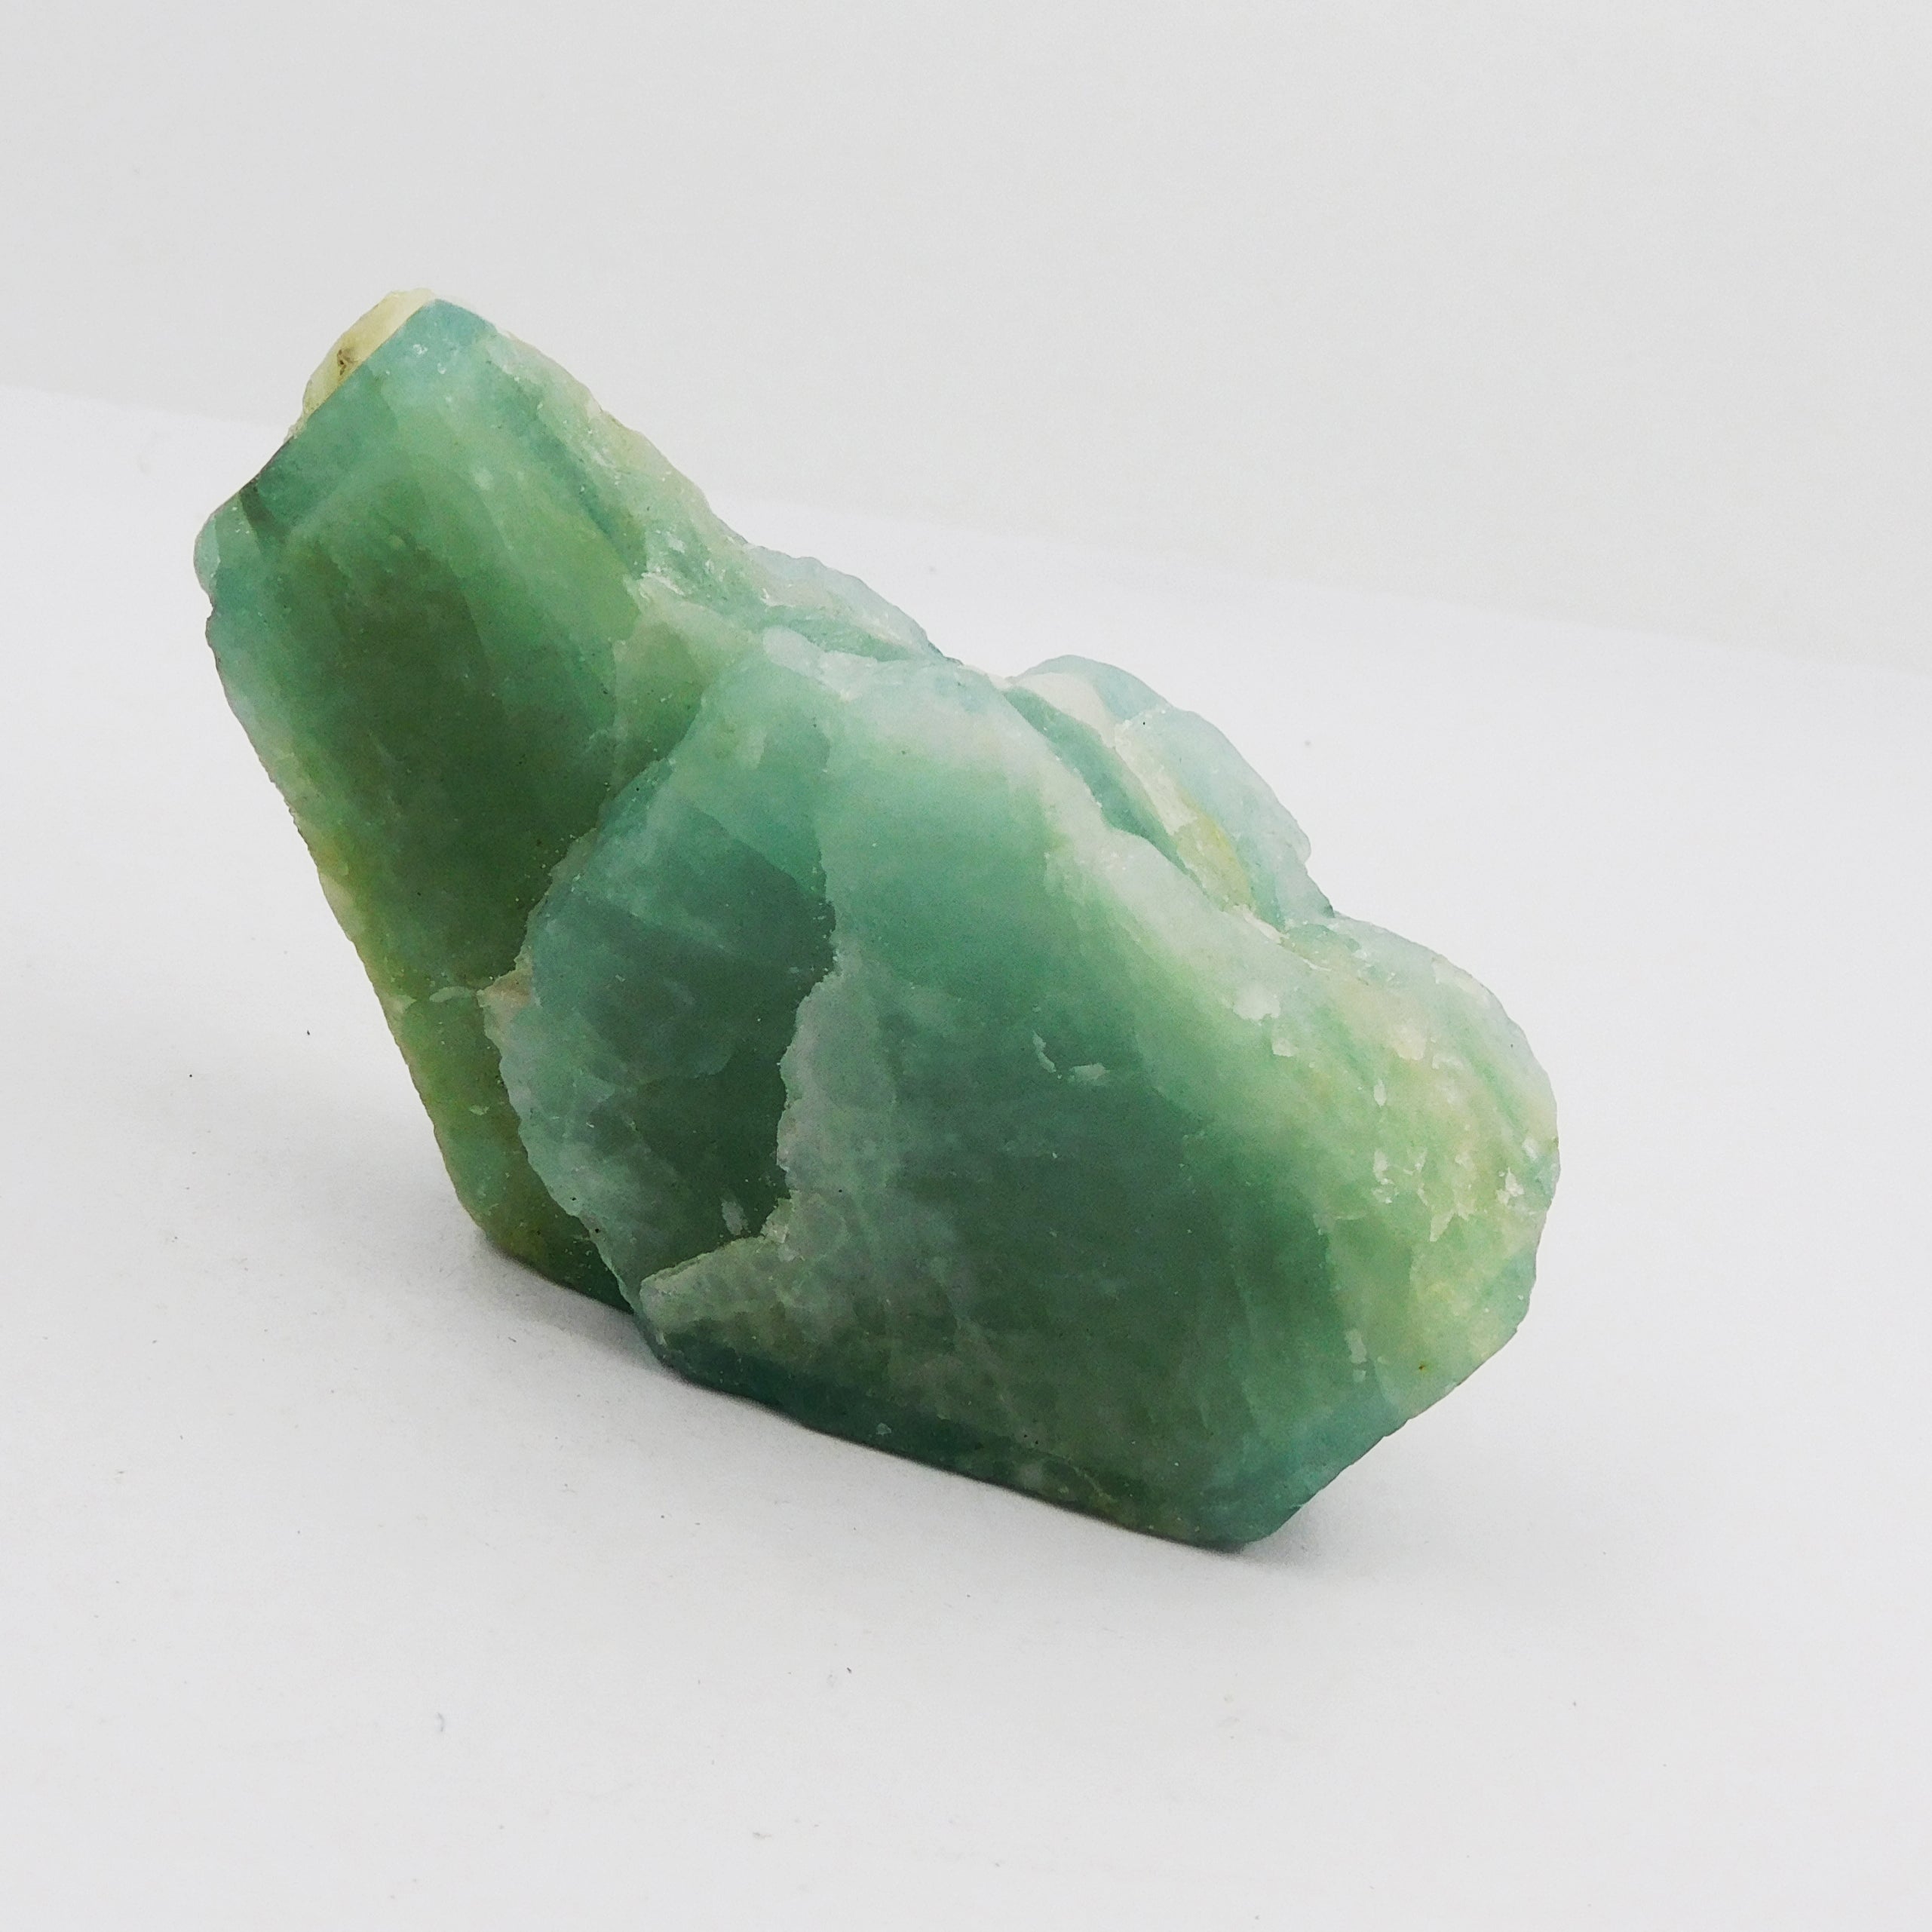 World Best Aquamarine 100% Natural Uncut Earth Mined Raw Rough 386 Carat Earth Mind Certified Natural Aquamarine Loose Gemstone Free Shipping Free Delivery